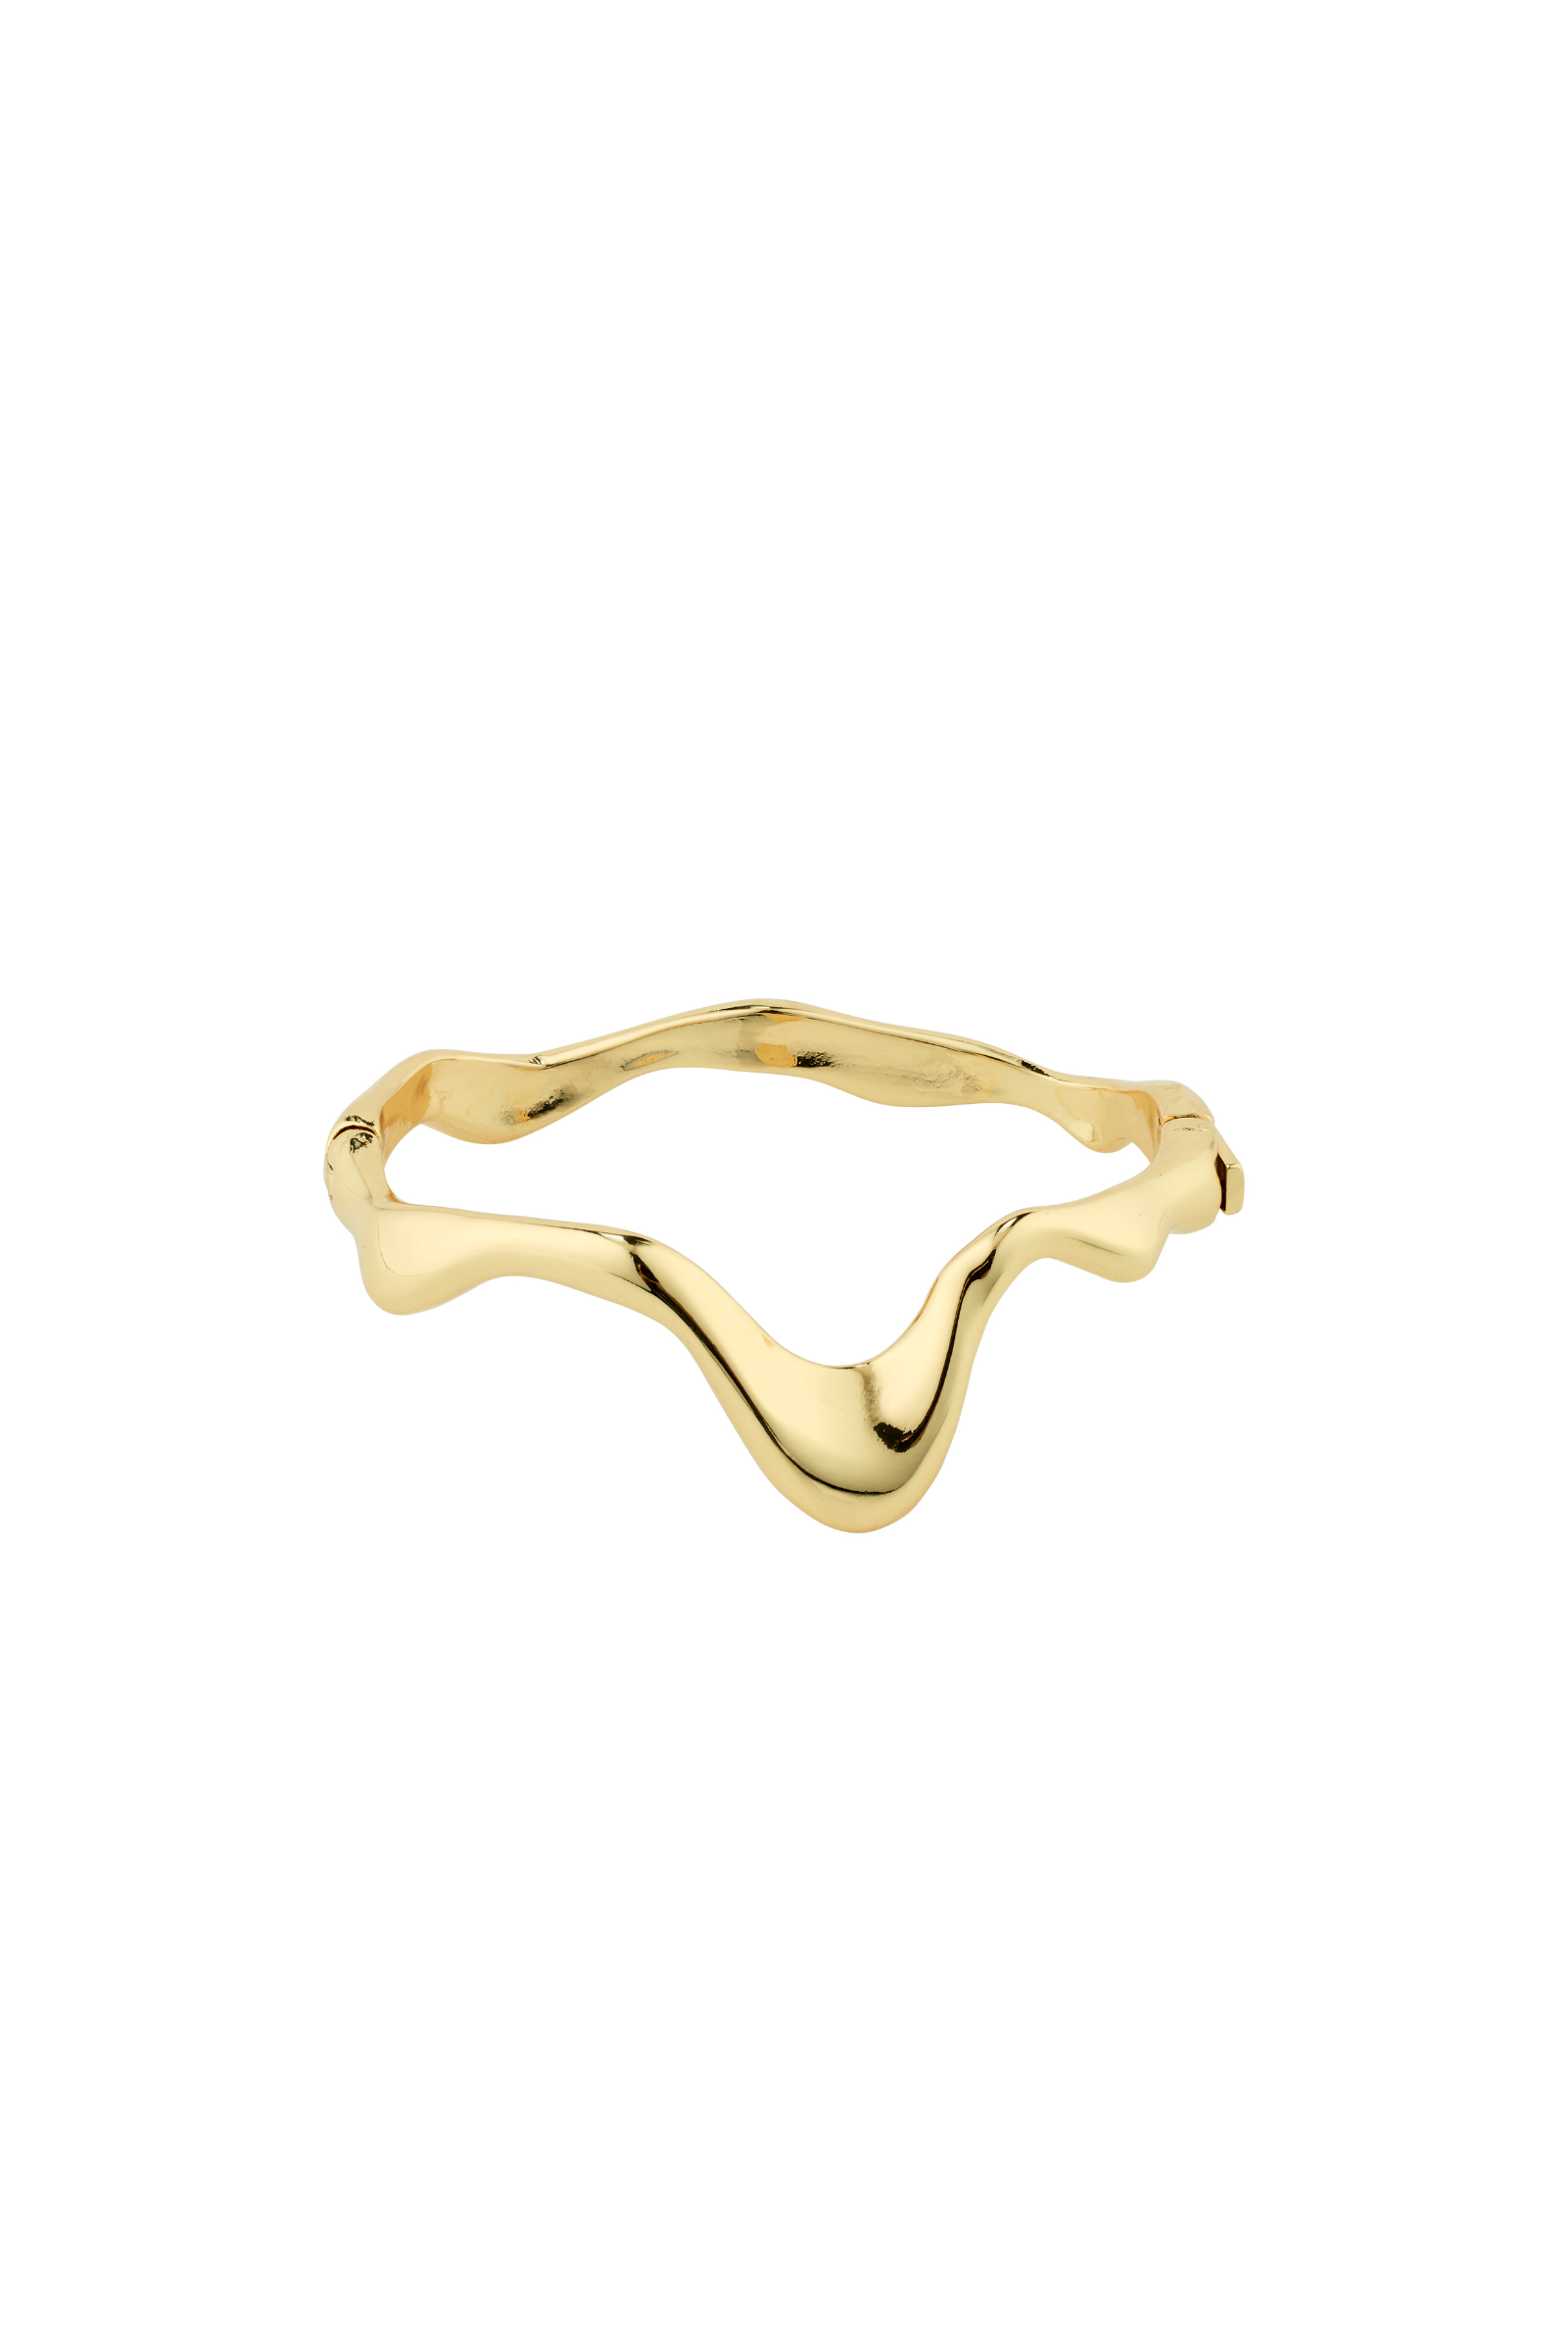 Moon Recycled Bangle - Gold